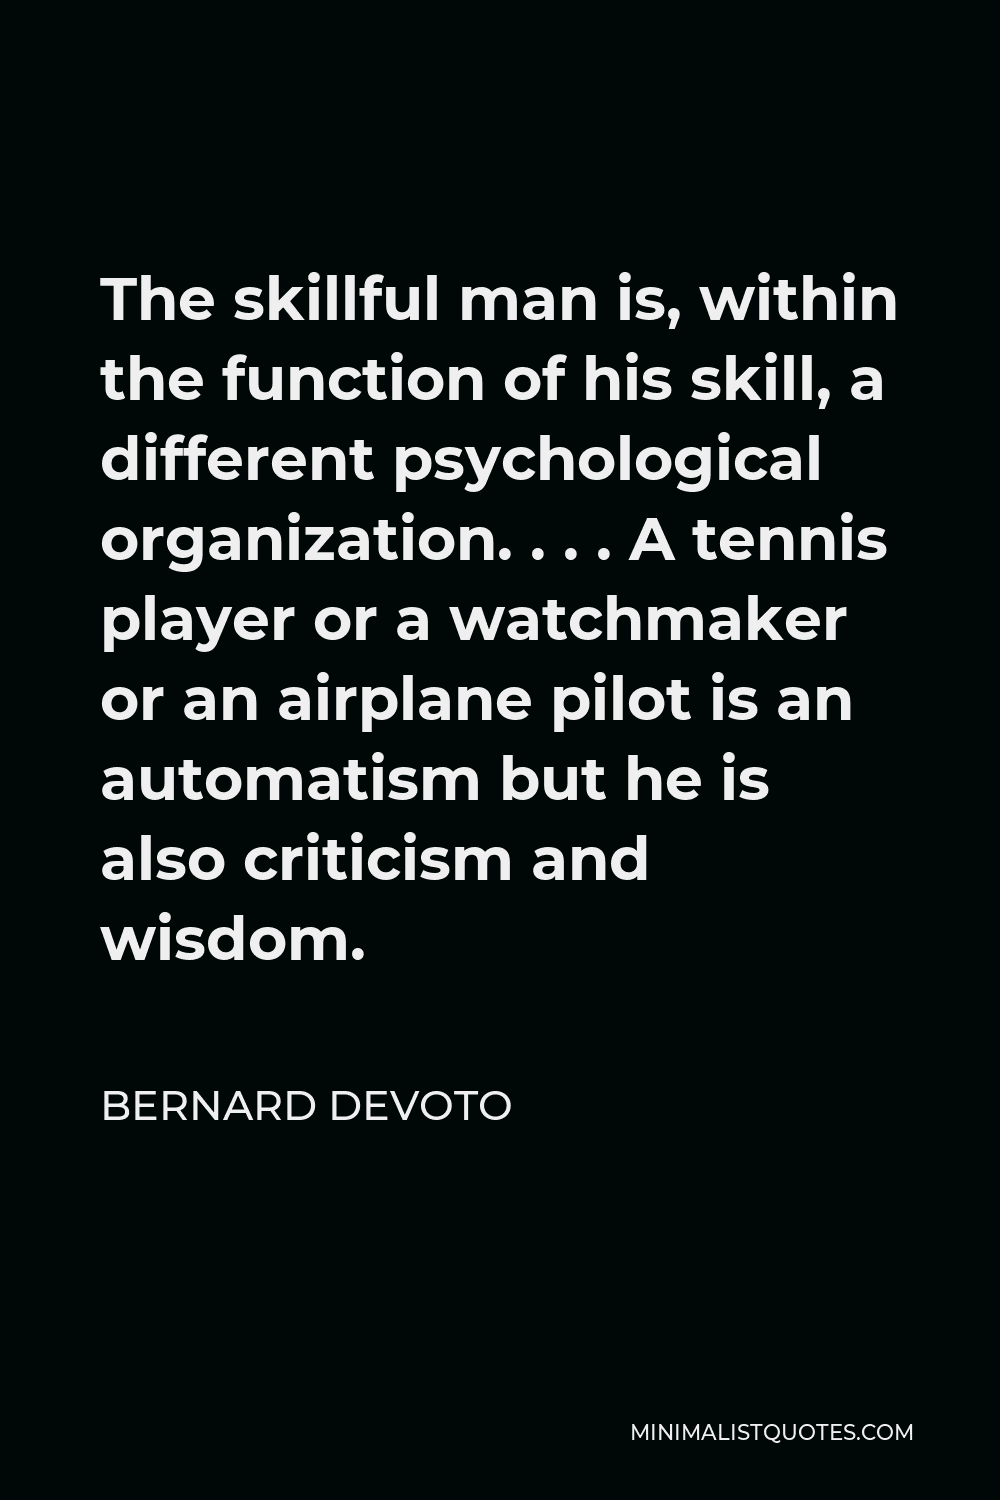 Bernard DeVoto Quote - The skillful man is, within the function of his skill, a different psychological organization. . . . A tennis player or a watchmaker or an airplane pilot is an automatism but he is also criticism and wisdom.